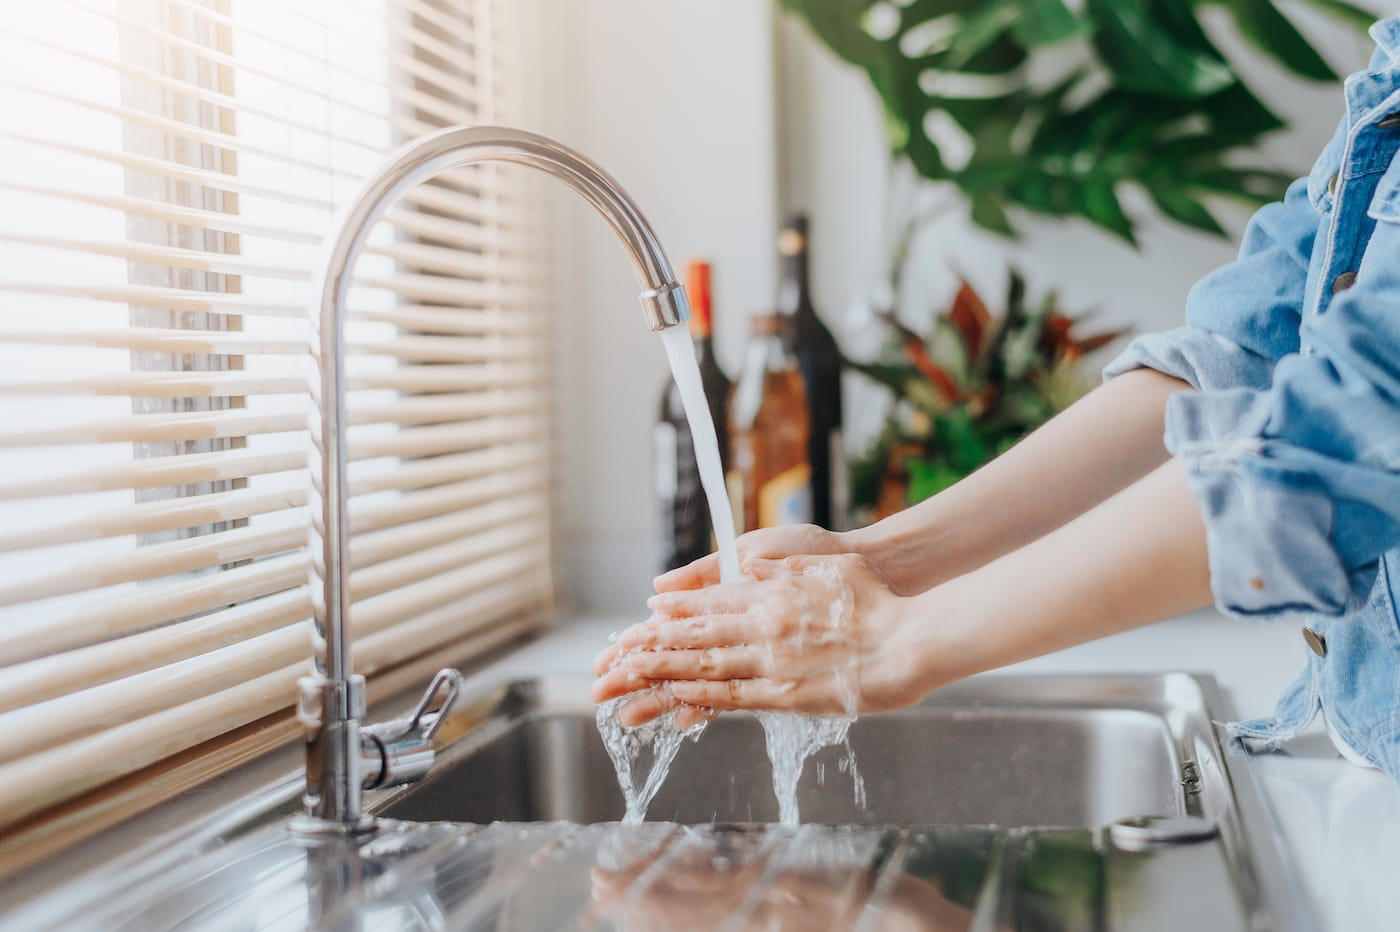 Washing your hands sounds trivial. Here's the science behind why it works